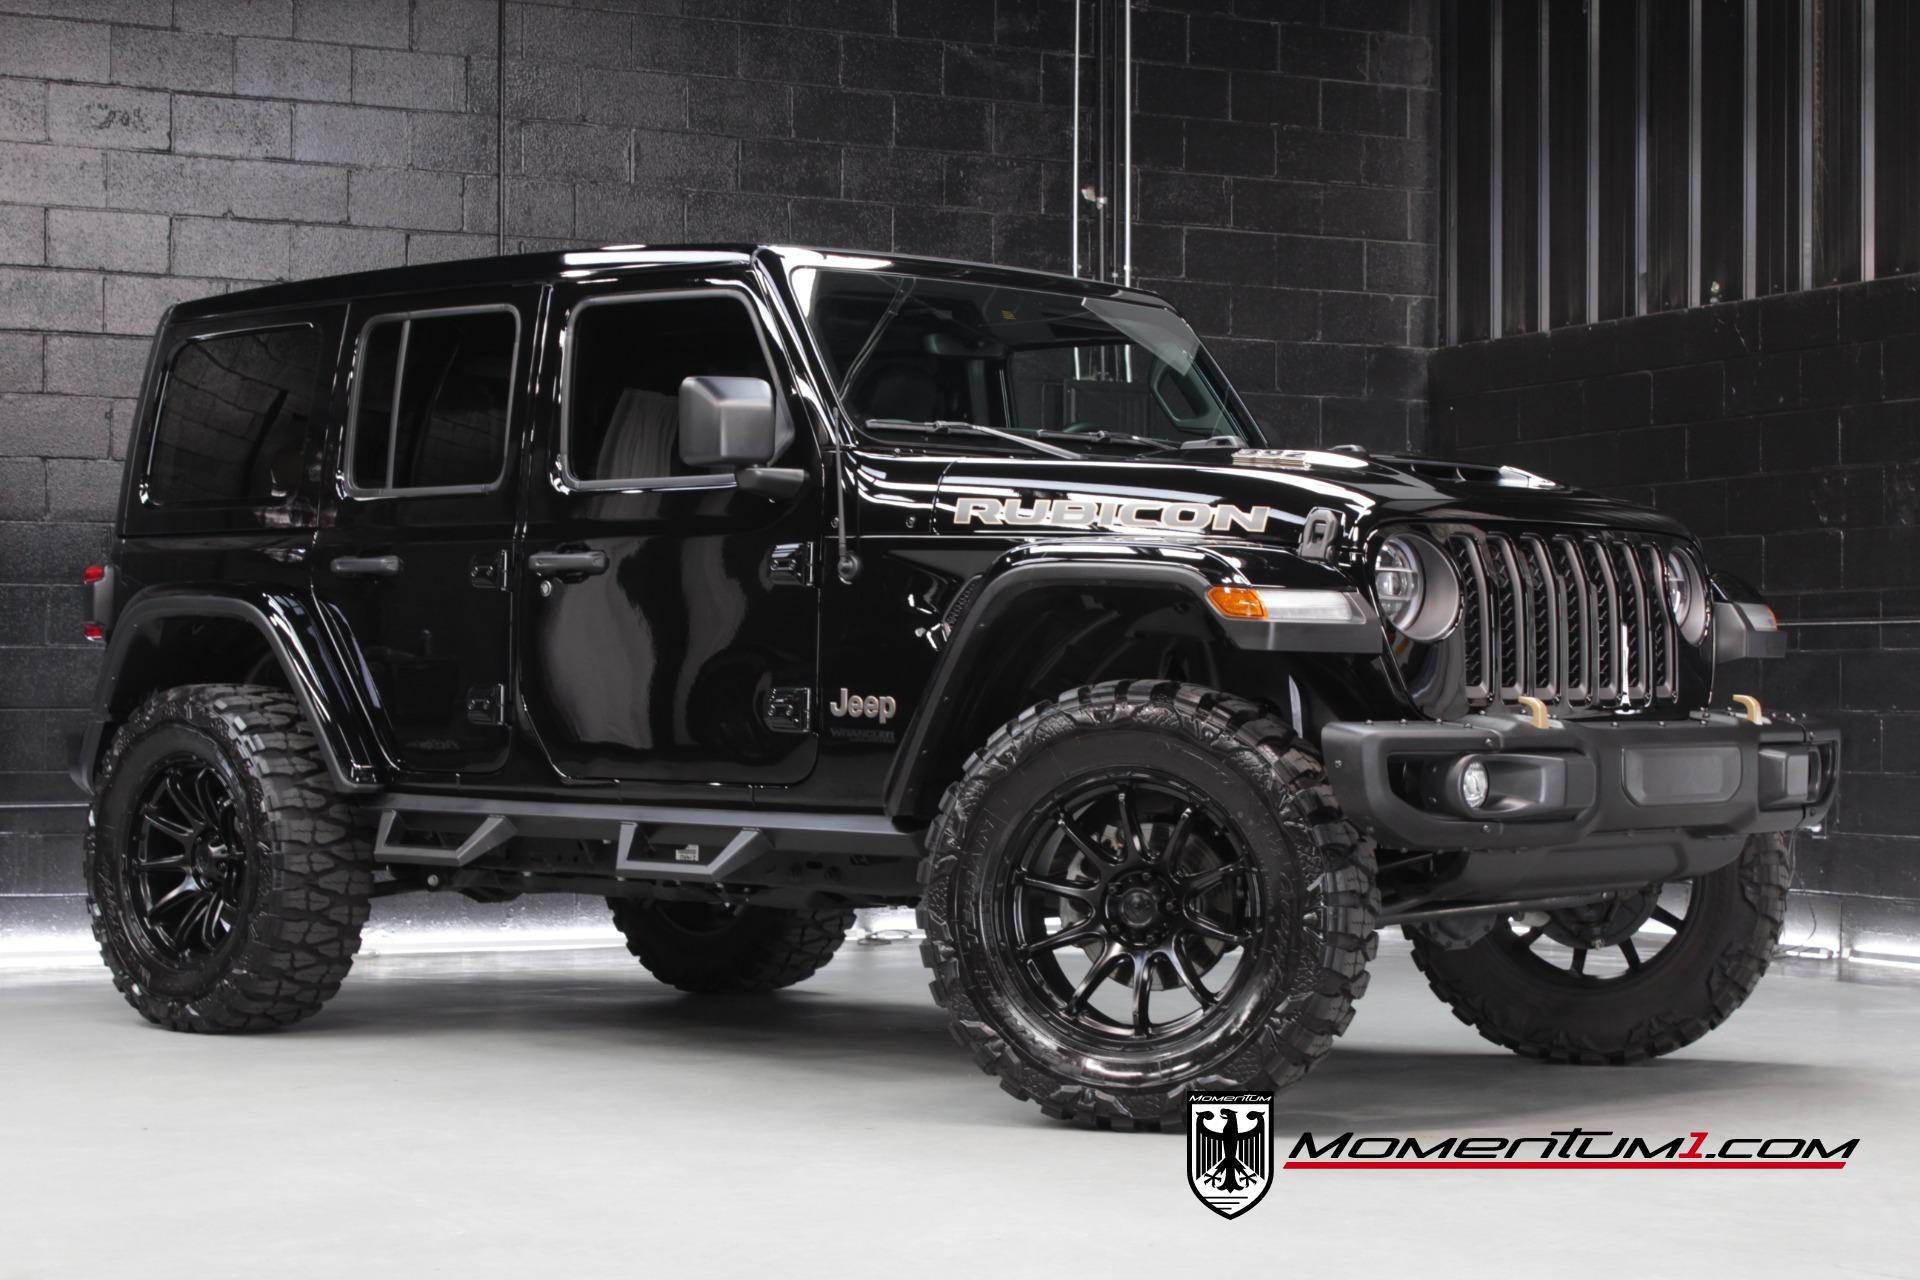 Used 2021 Jeep Wrangler Unlimited Rubicon 392 Skyview Roof For Sale (Sold)  | Momentum Motorcars Inc Stock #858087